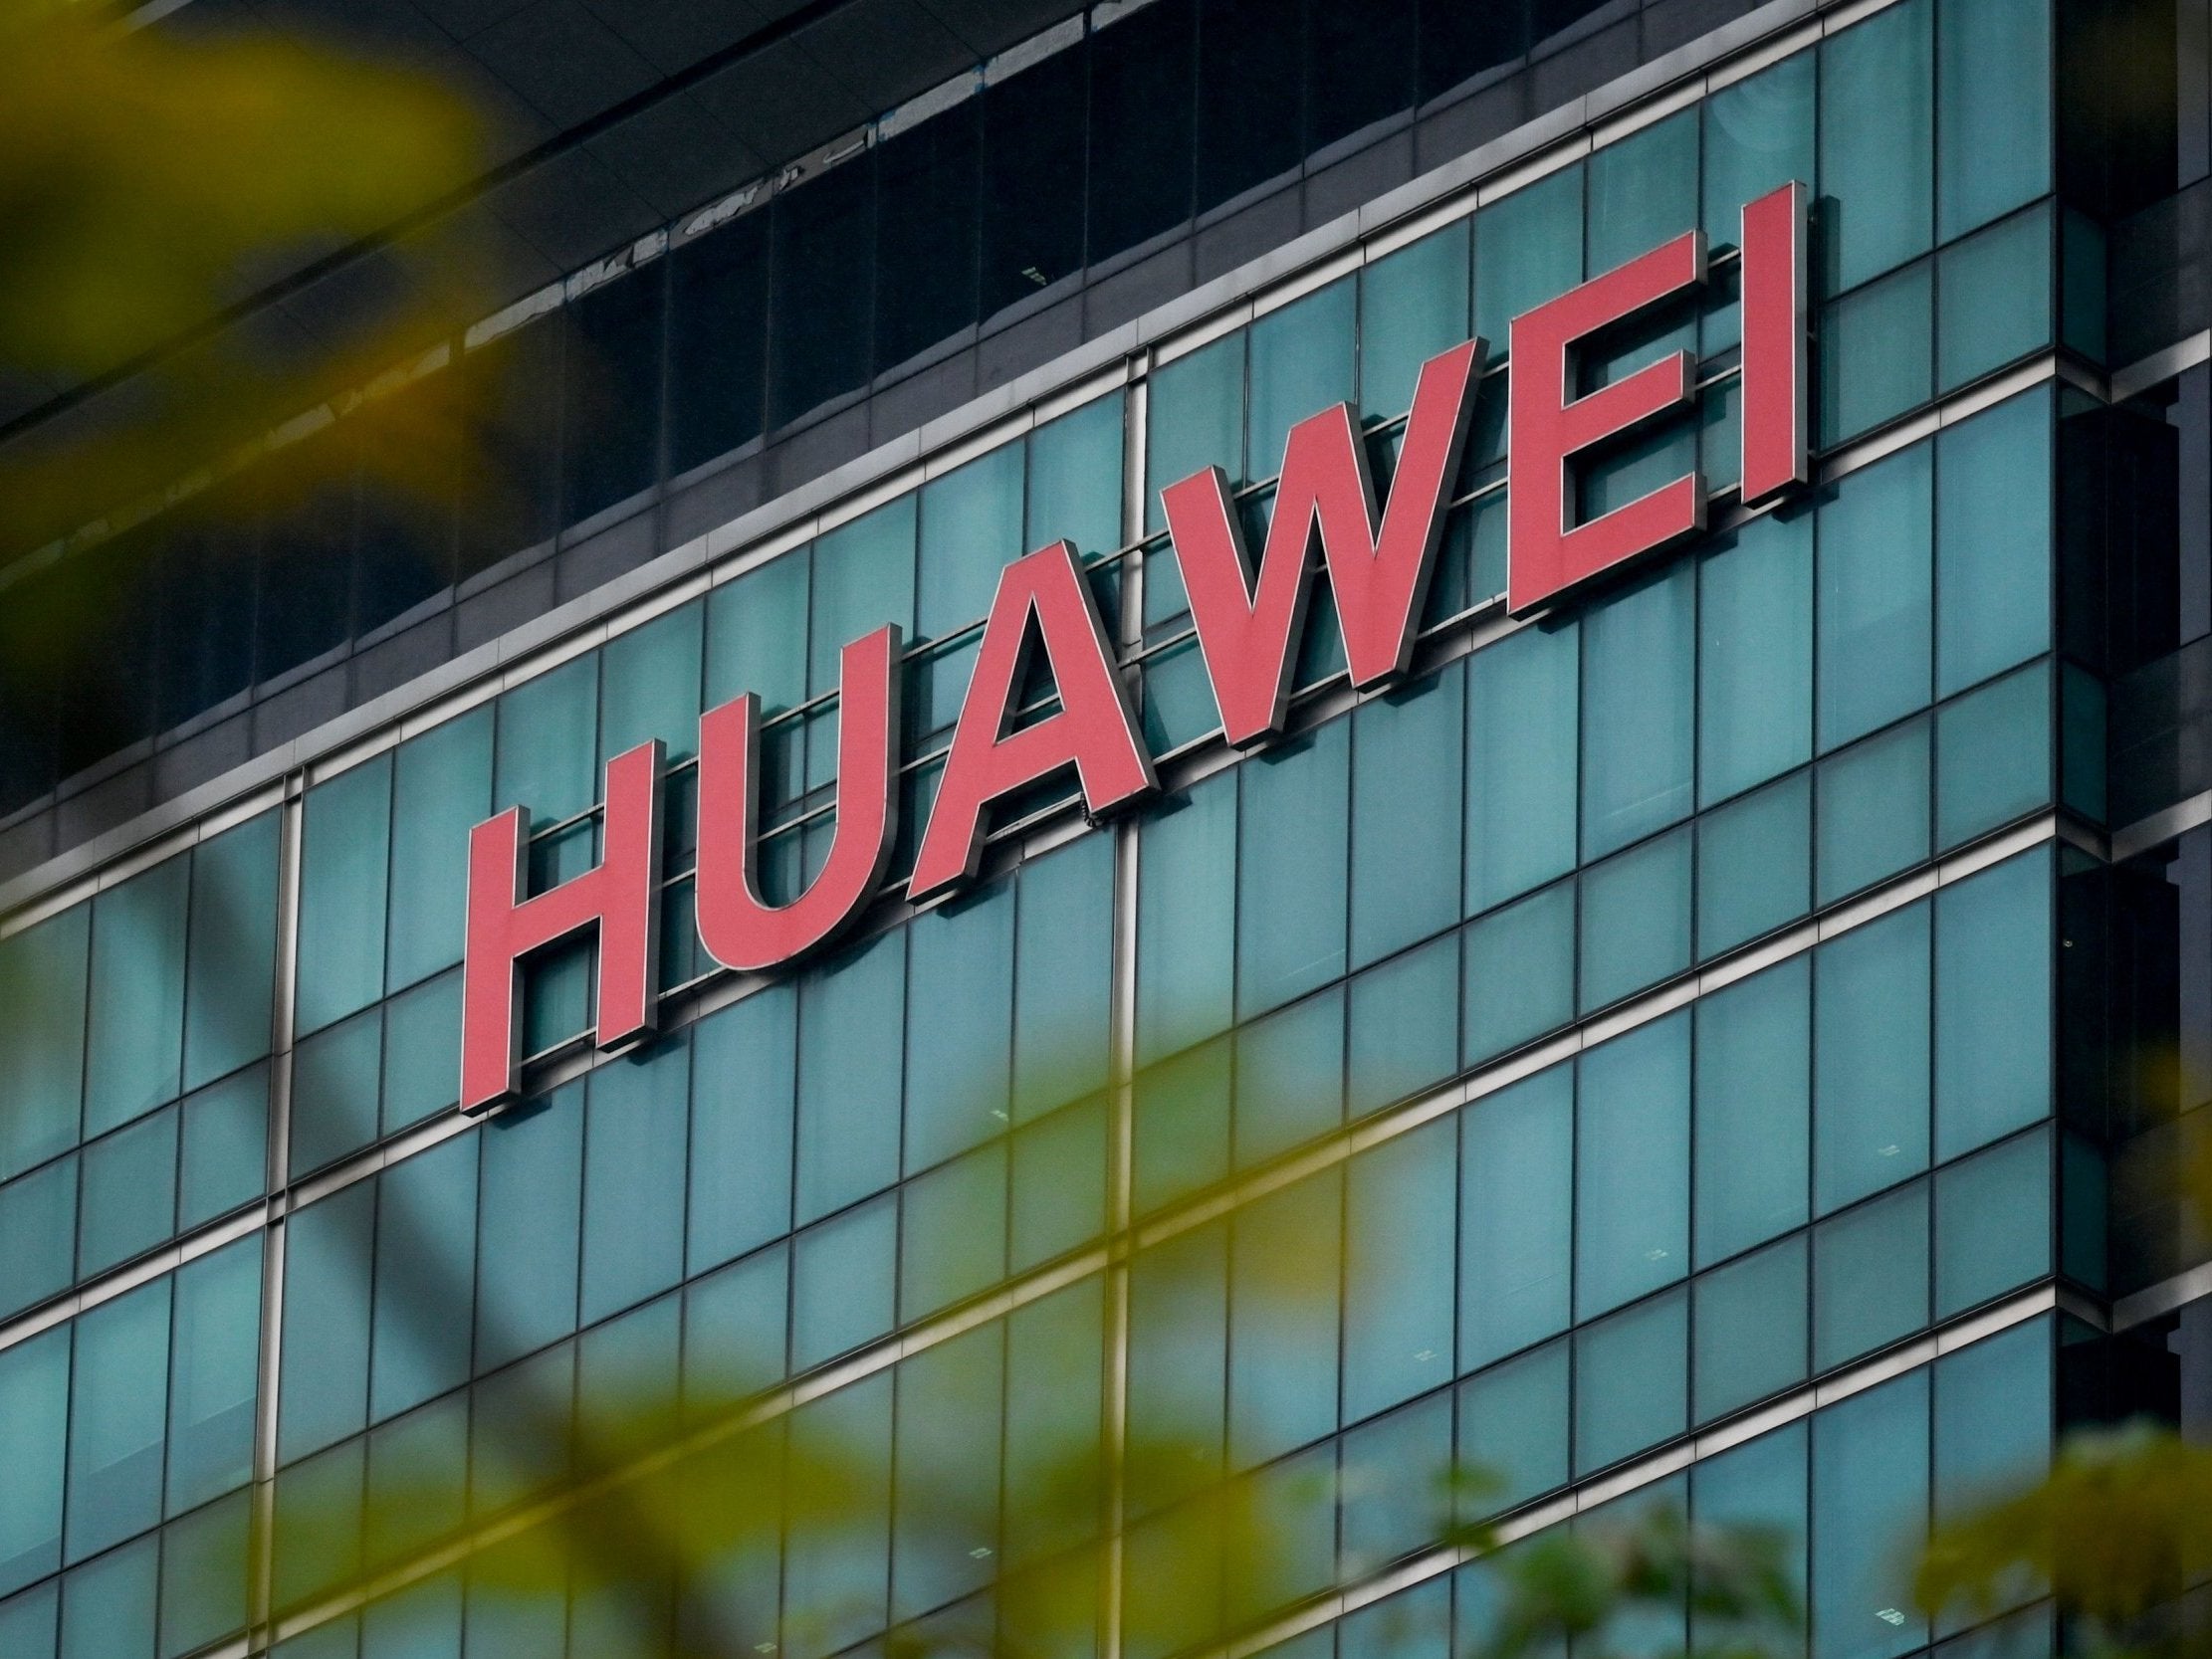 The US has banned Huawei from government networks and put pressure on the UK to do the same